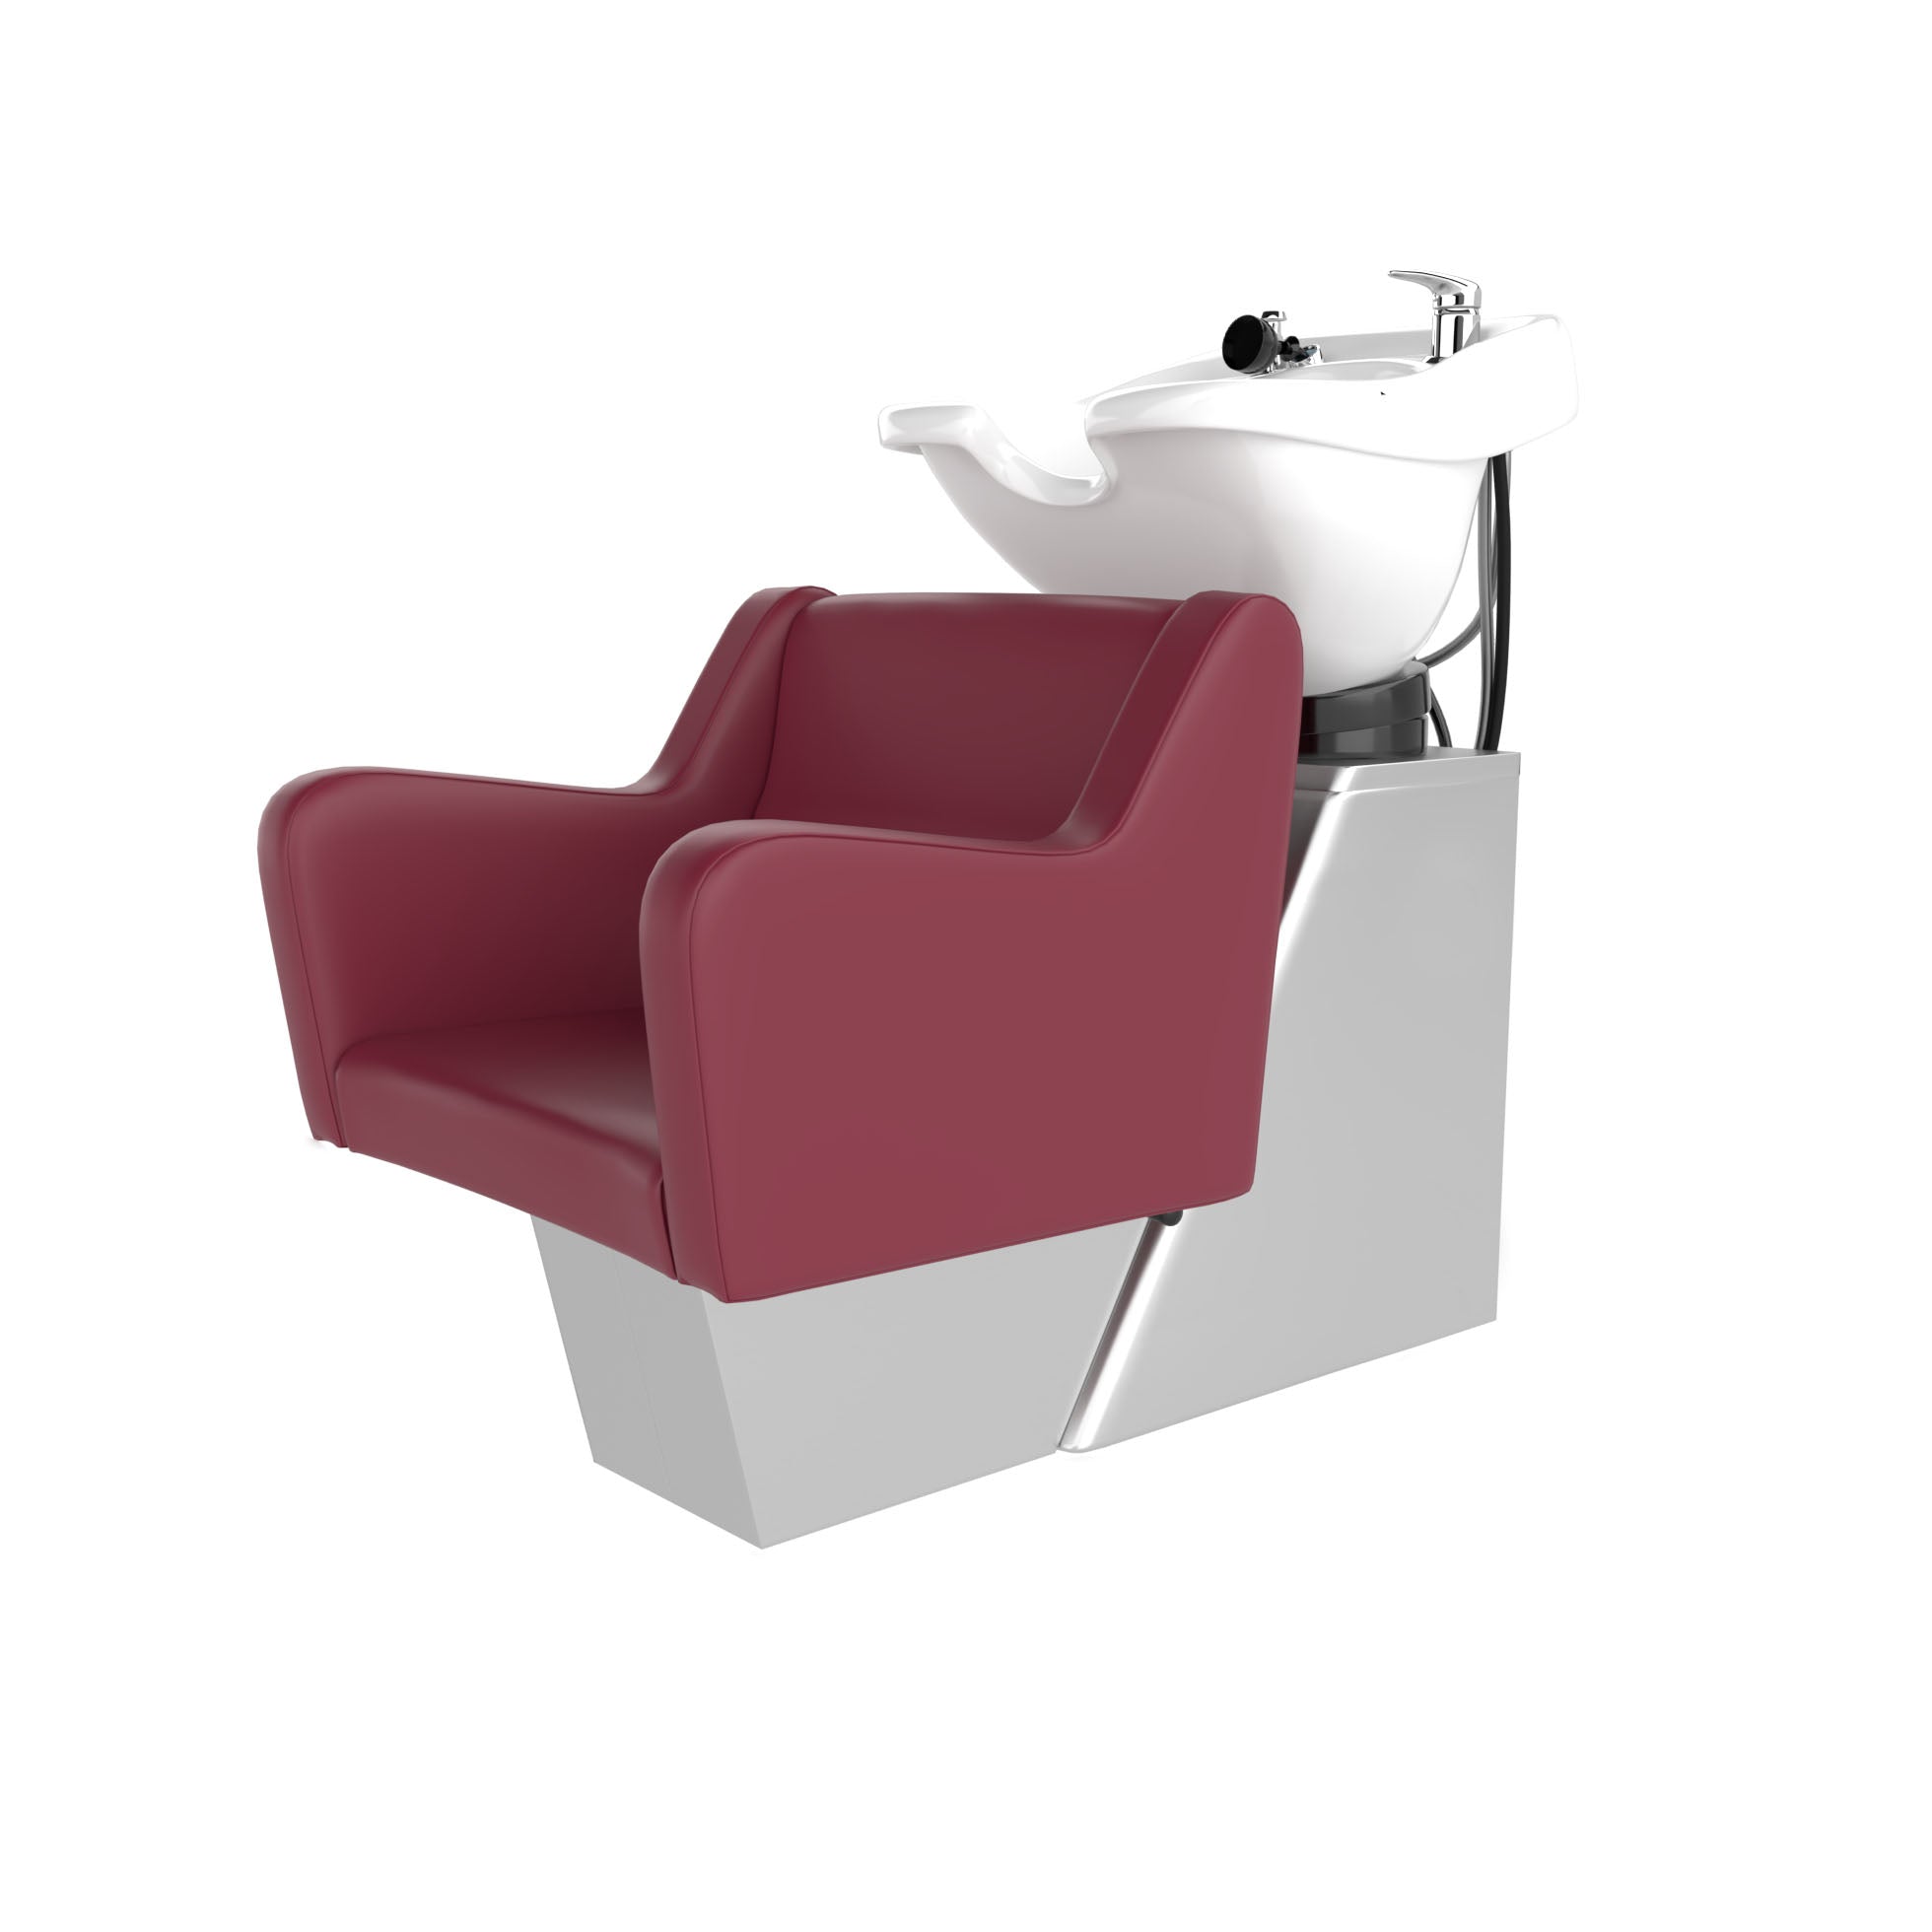 Hutton Backwash Shuttle Shampoo on Veeco Brushed Stainless Steel Chassis - Collins - Salon Equipment and Barber Equipment